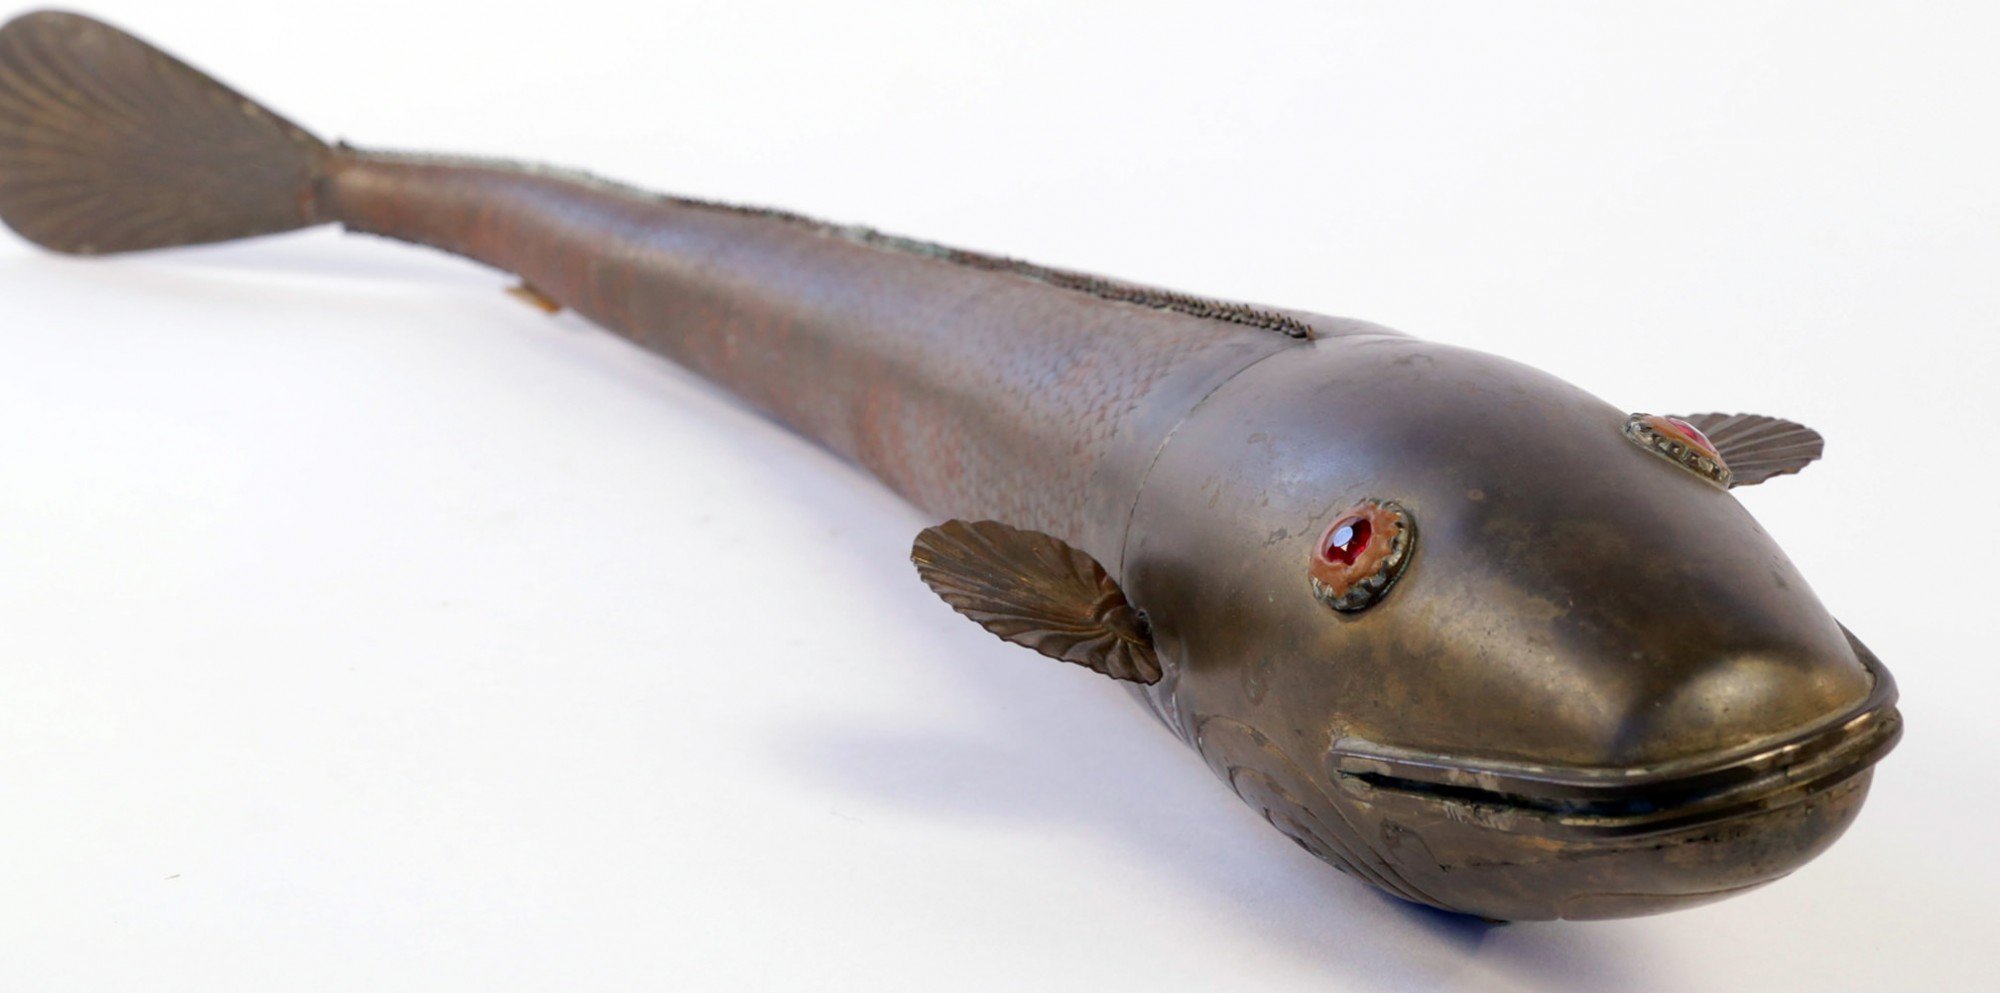 Persian Brass Articulated Fish by 20th Century School